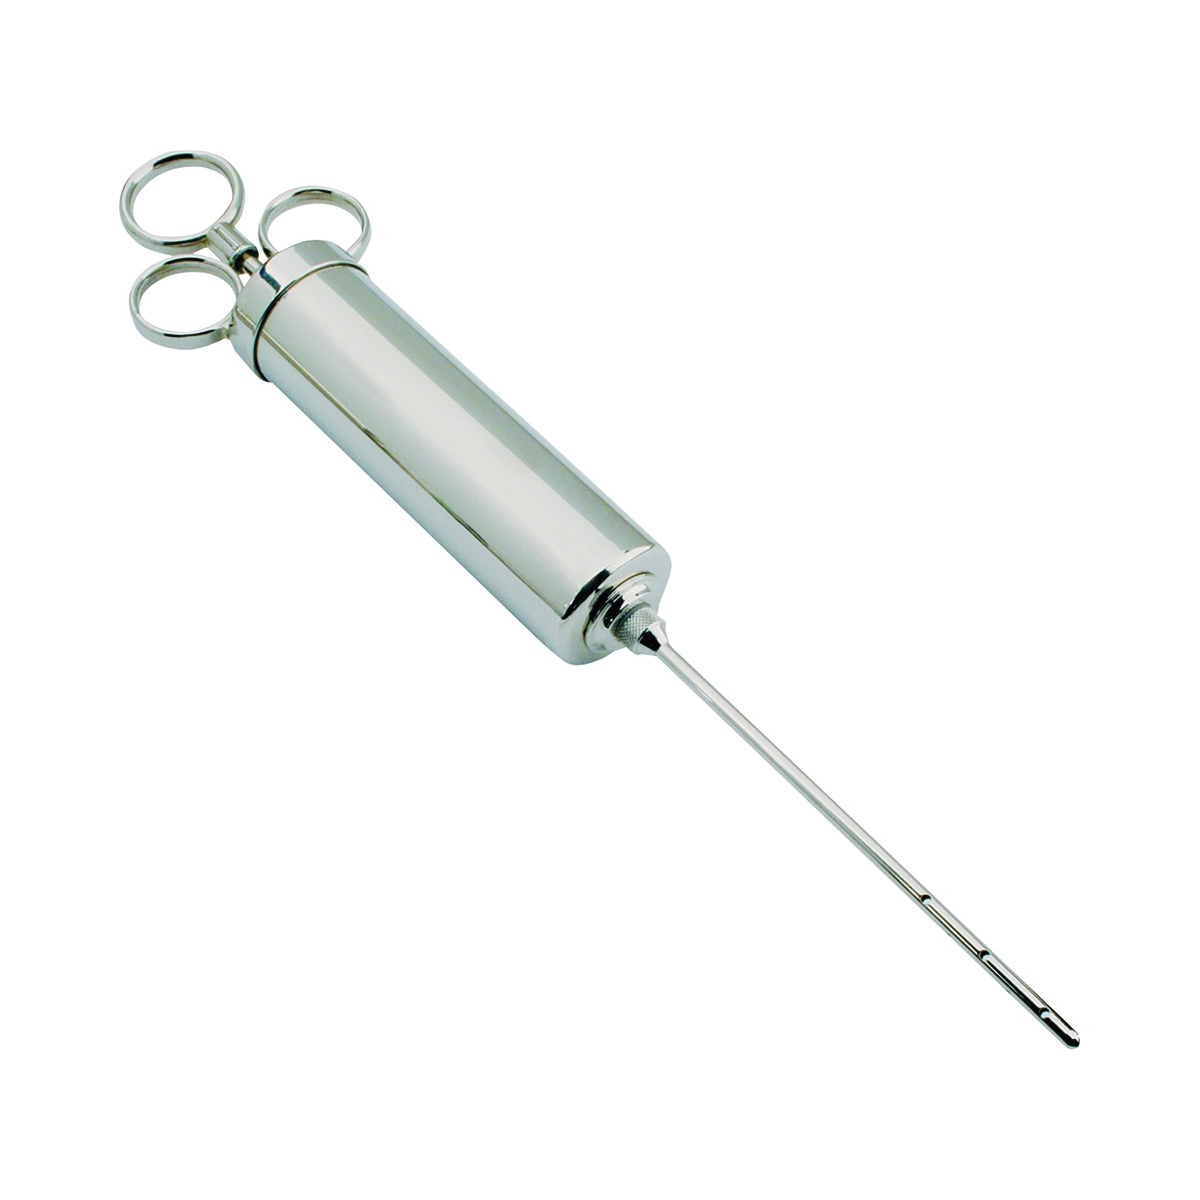 23-0404-W Marinade Injector, 4 oz Capacity, 6 in L Needle, 10-Hole Injector Needle, Silver